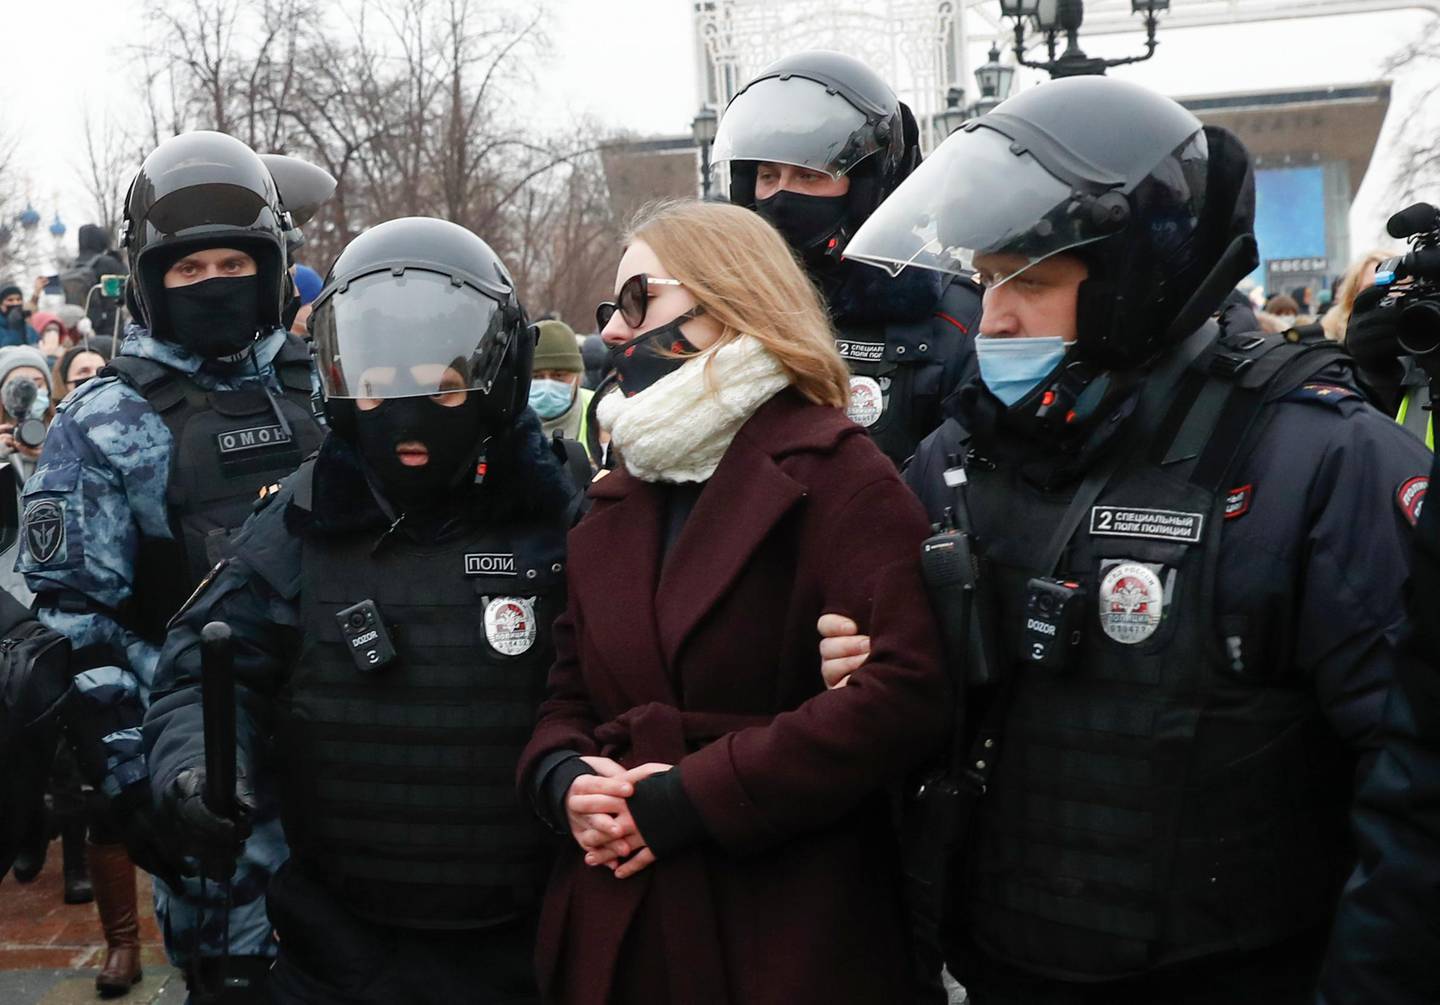 Police detain a woman during a protest against the jailing of opposition leader Alexei Navalny in Moscow, Russia, Saturday, Jan. 23, 2021. Russian police are arresting protesters demanding the release of top Russian opposition leader Alexei Navalny at demonstrations in the country's east and larger unsanctioned rallies are expected later Saturday in Moscow and other major cities. (AP Photo/Pavel Golovkin)